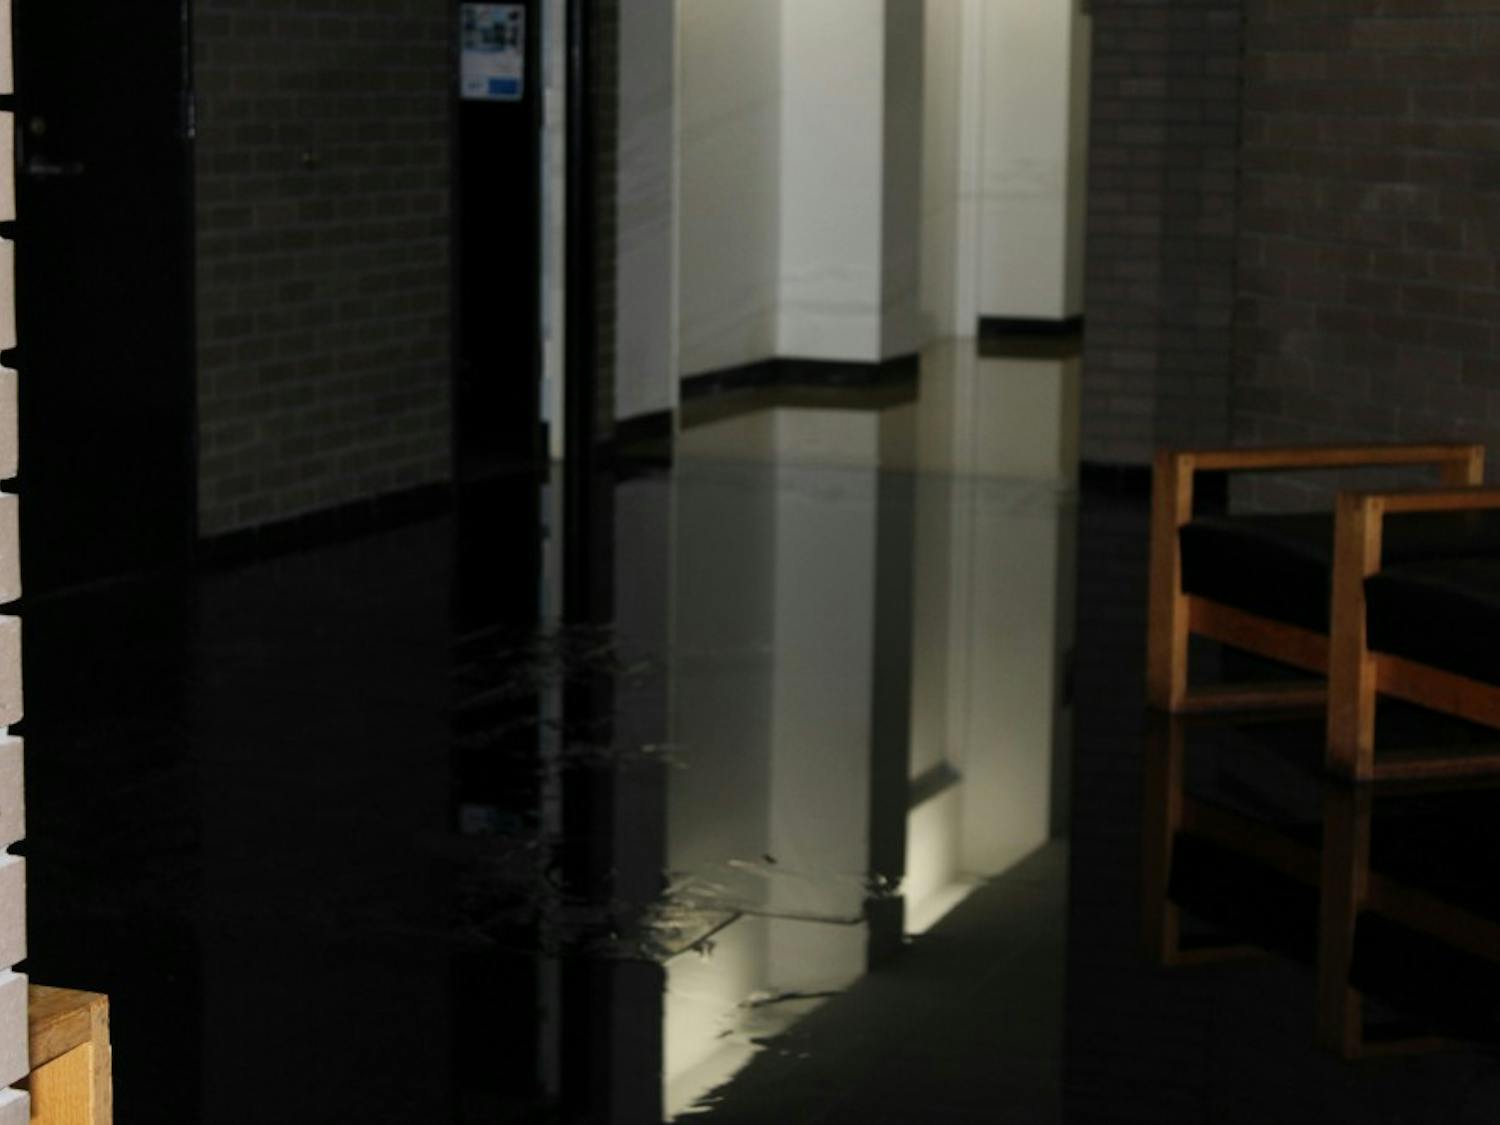 The fourth floor lobby of Clemens hall is flooded as a  result of a burst water valve on the fourth floor cooling system.